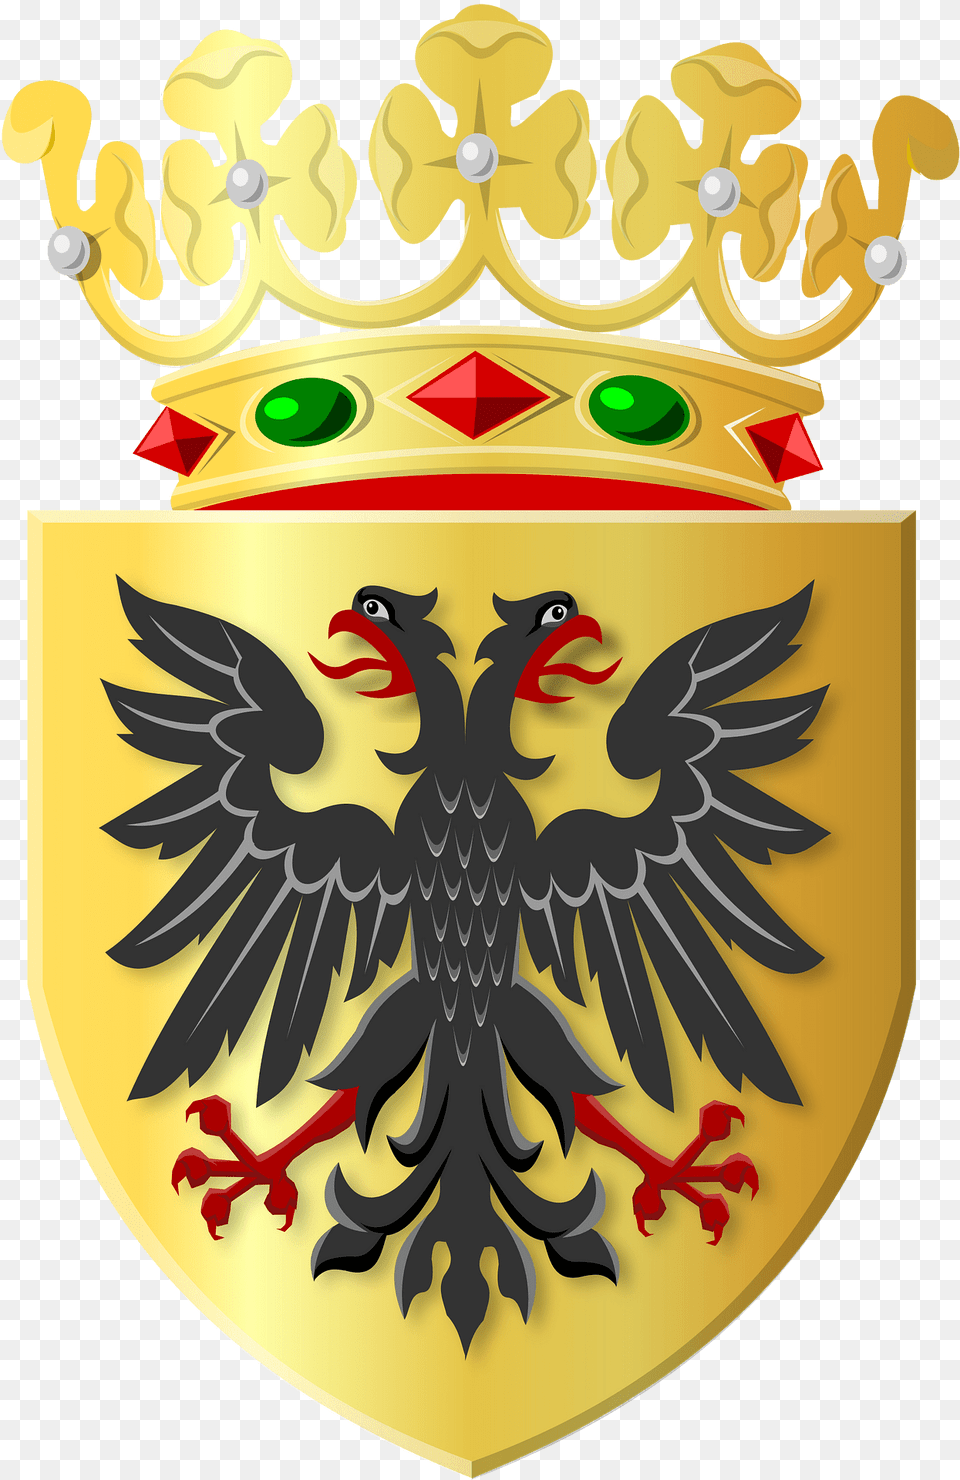 Golden Shield With Black Eagle And Golden Crown Clipart, Armor, Animal, Bird, Penguin Png